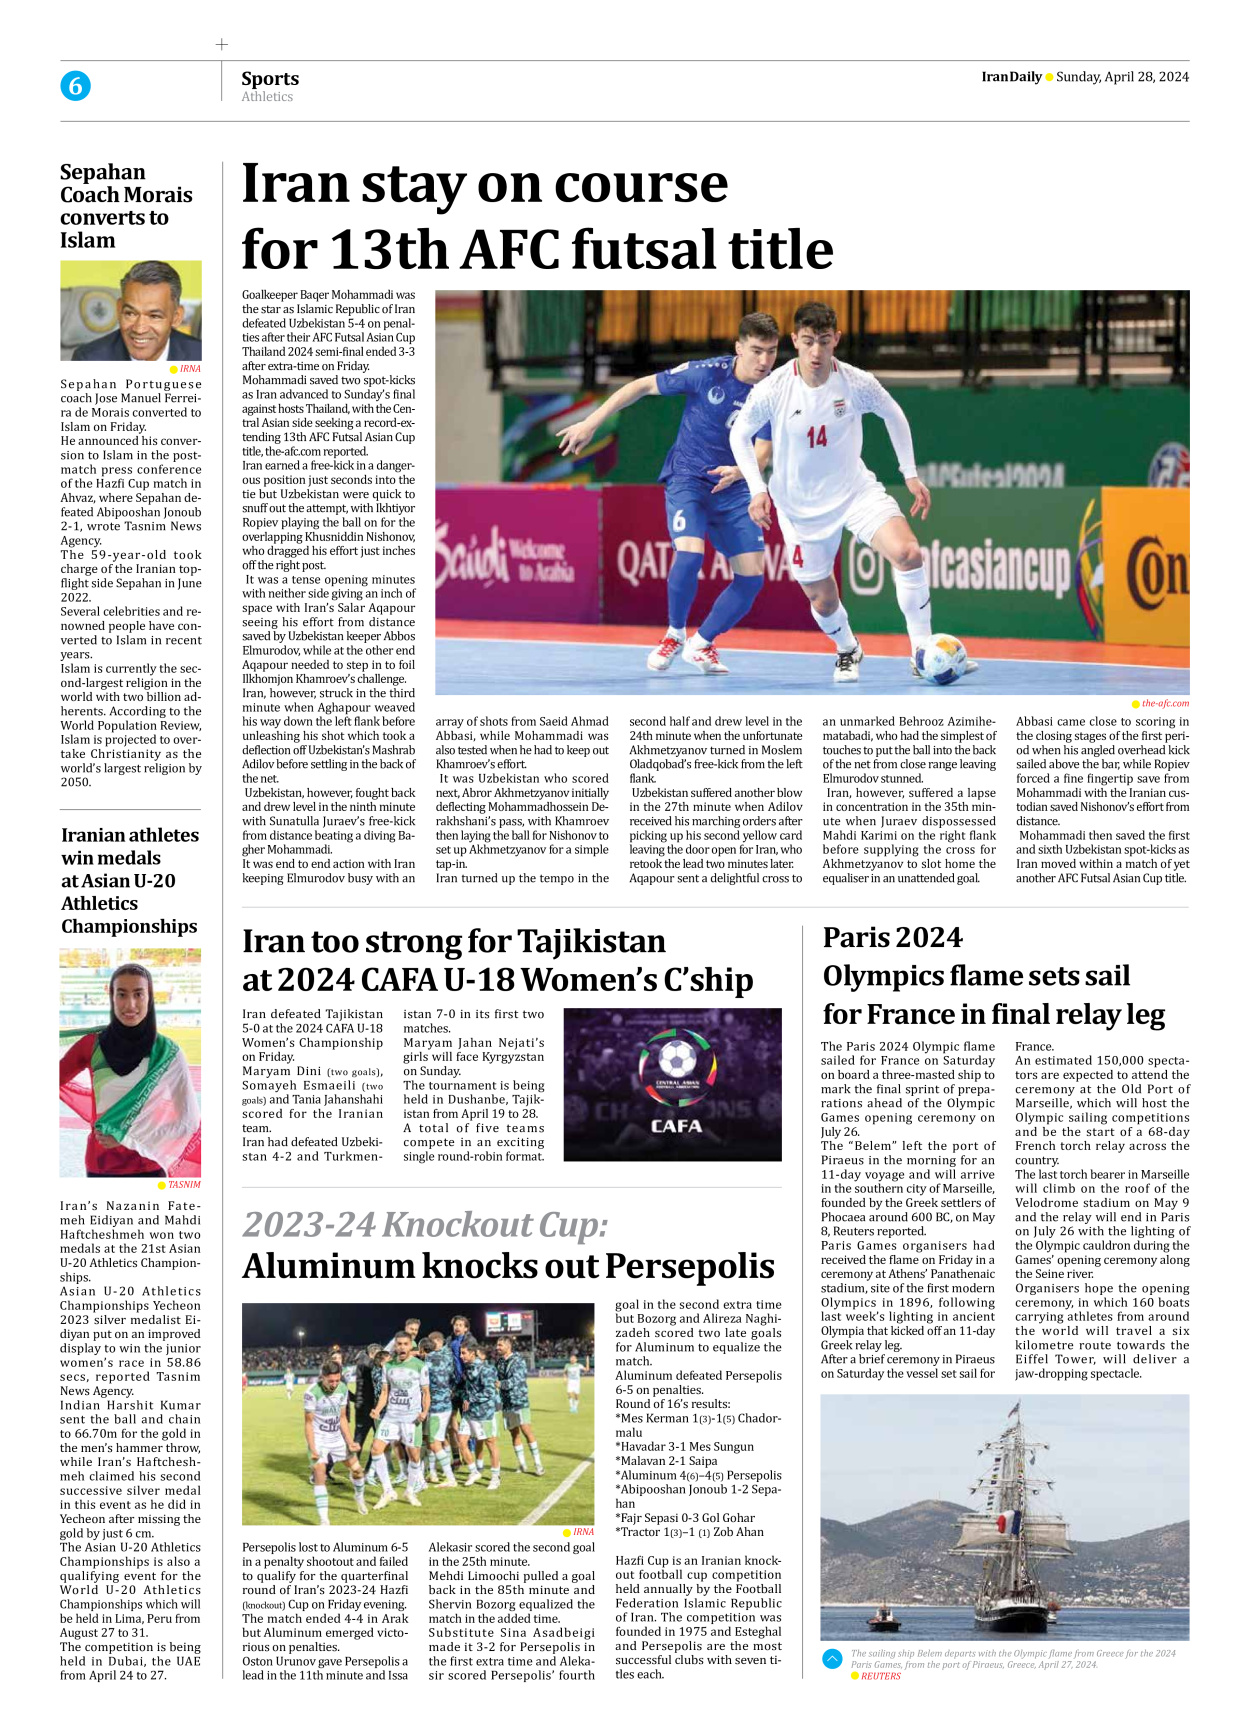 Iran Daily - Number Seven Thousand Five Hundred and Forty Four - 28 April 2024 - Page 6